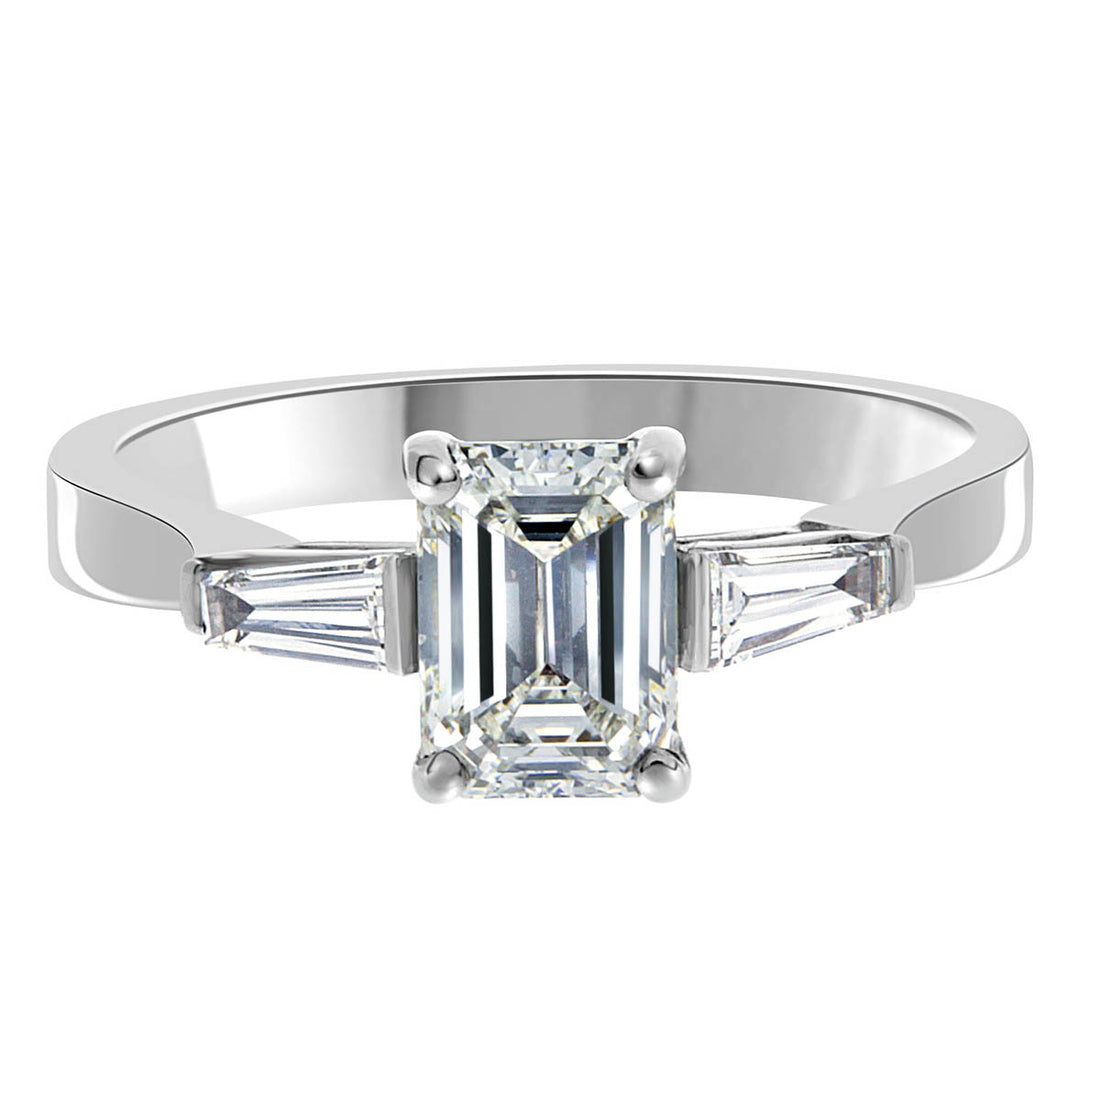 Emerald Cut With Tapered Baguettes in white gold